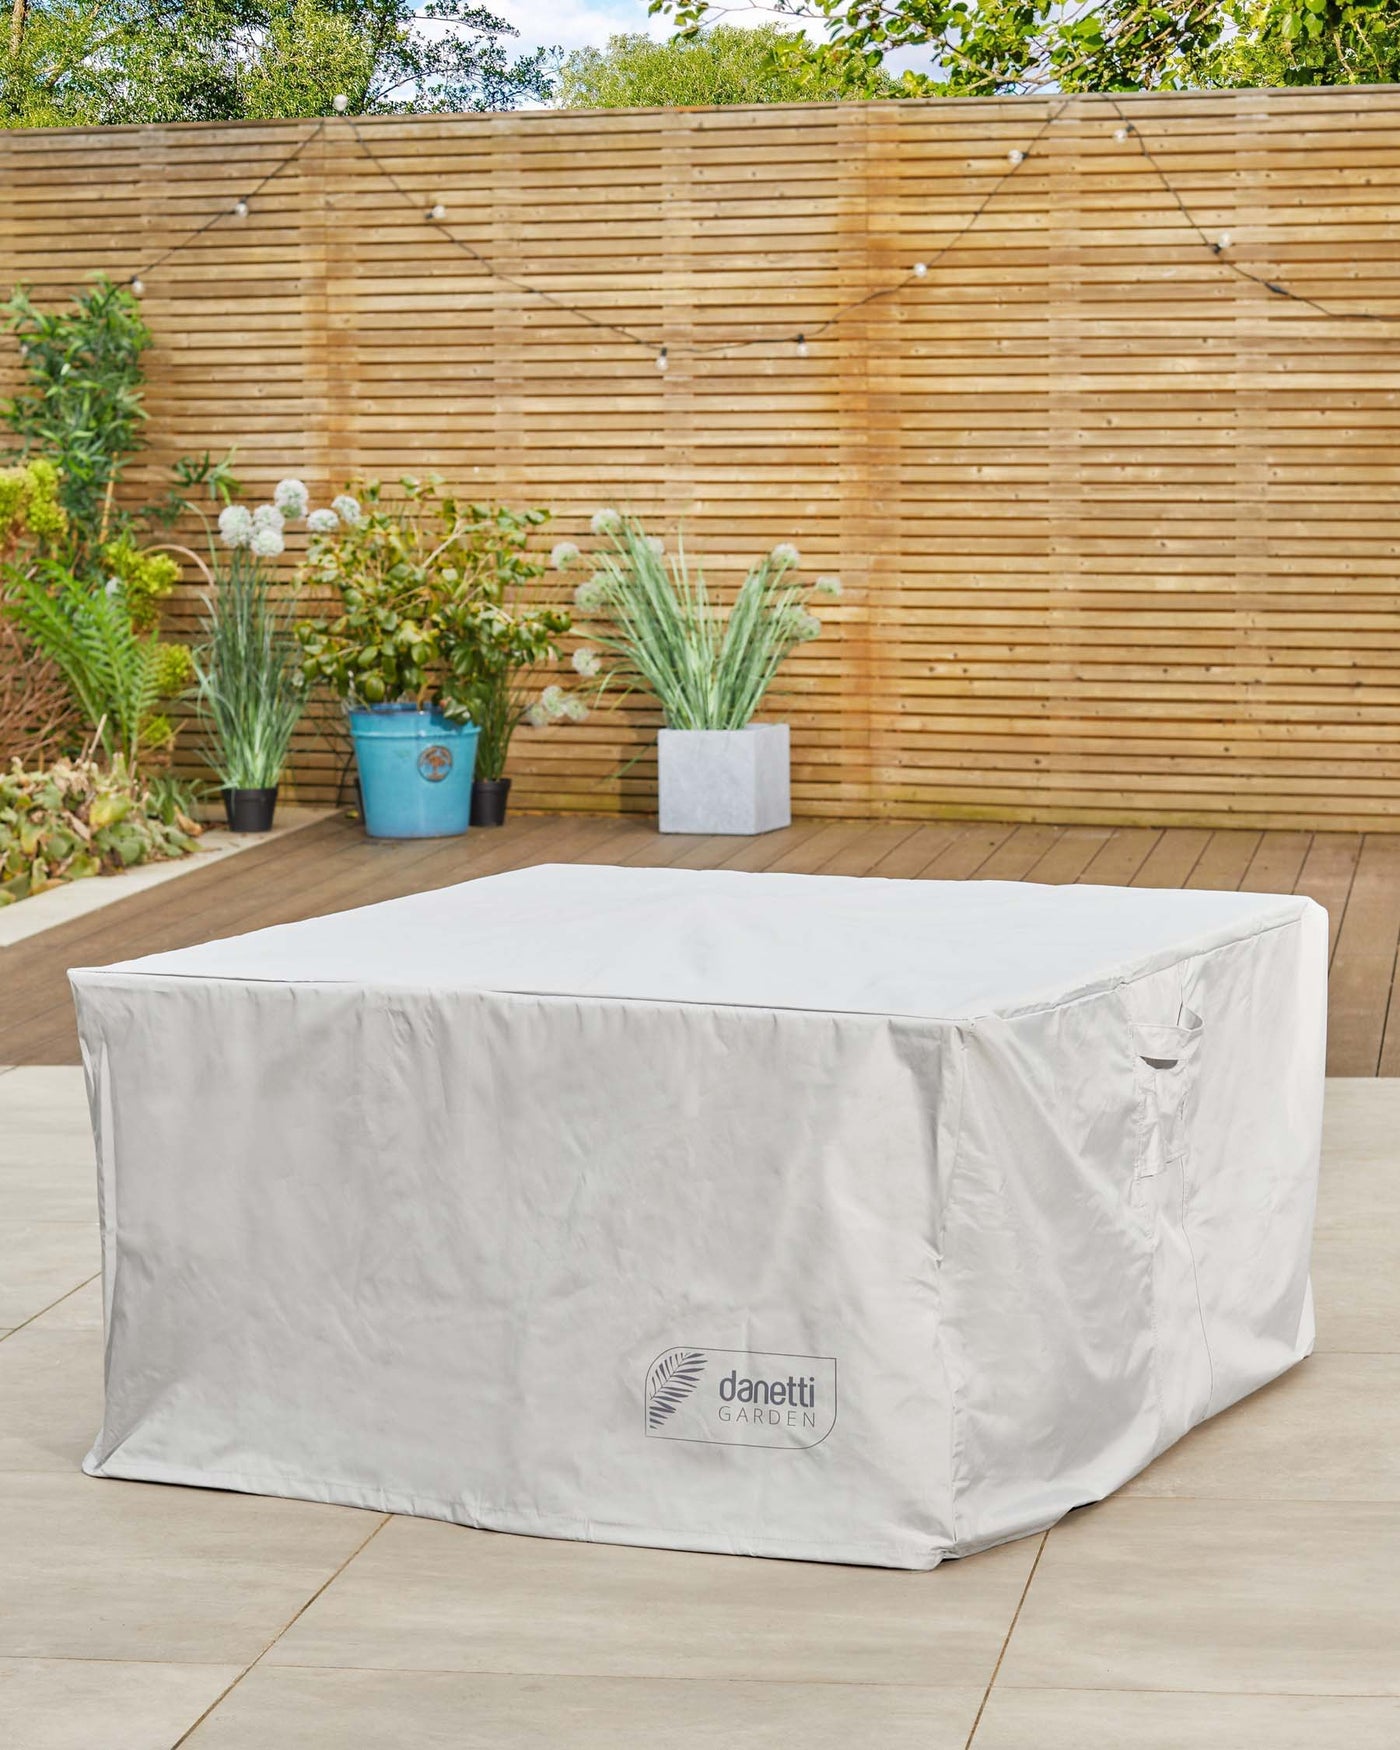 Outdoor furniture covered with a large protective grey cover with the logo "Danetti Garden" visible, suggesting preservation against weather elements. The actual furniture is not visible due to the cover.